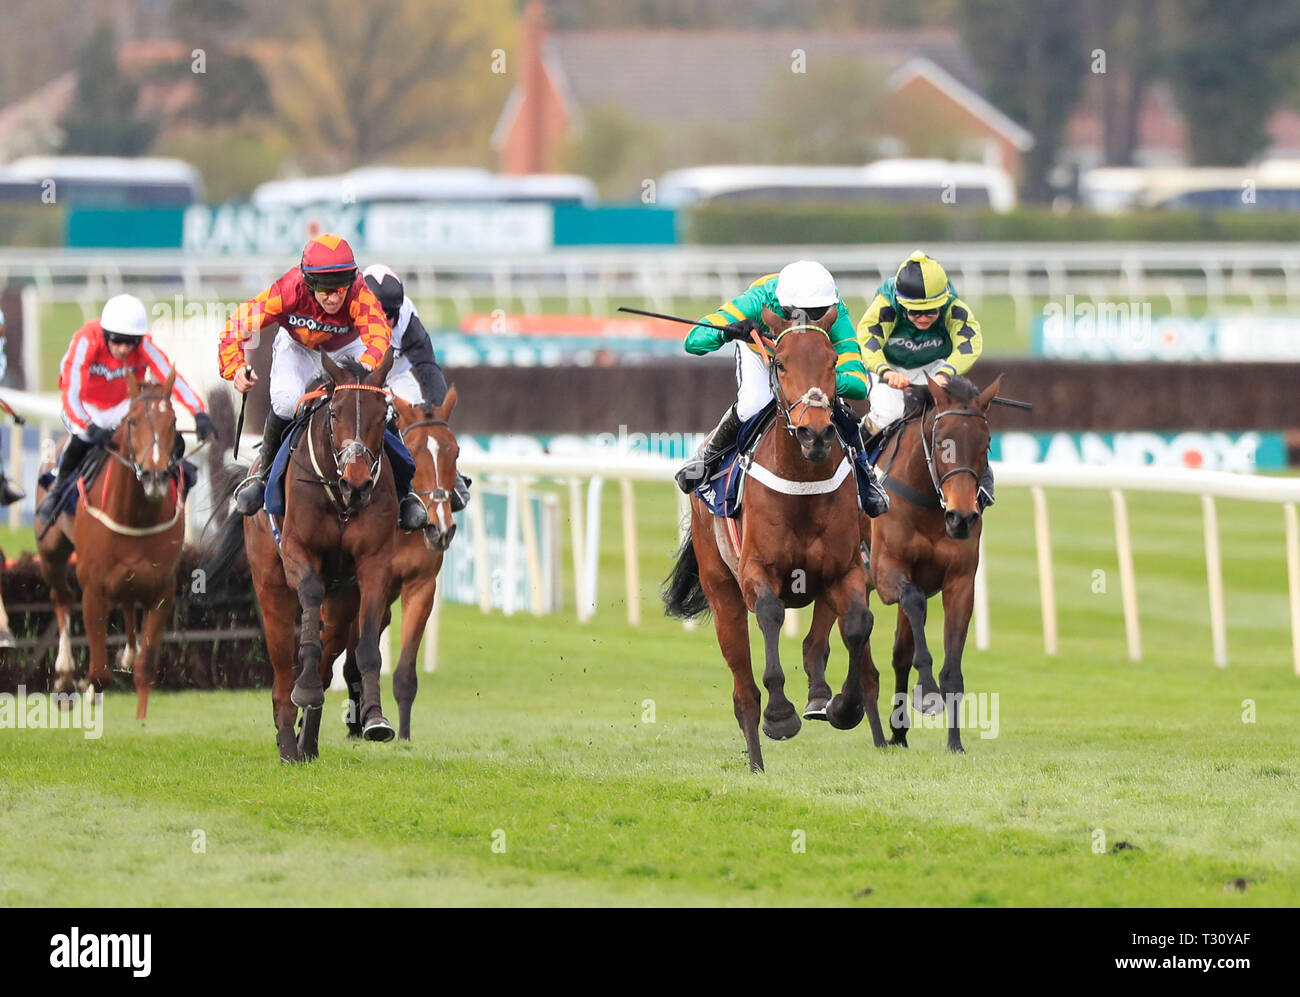 Aintree Racecourse, Aintree, UK. 5th Apr, 2019. The 2019 Grand National horse racing festival, day 2; Champ (white cap) ridden by Barry Geraghty runs on to win The Doom Bar Sefton Novices Hurdle Credit: Action Plus Sports/Alamy Live News Stock Photo